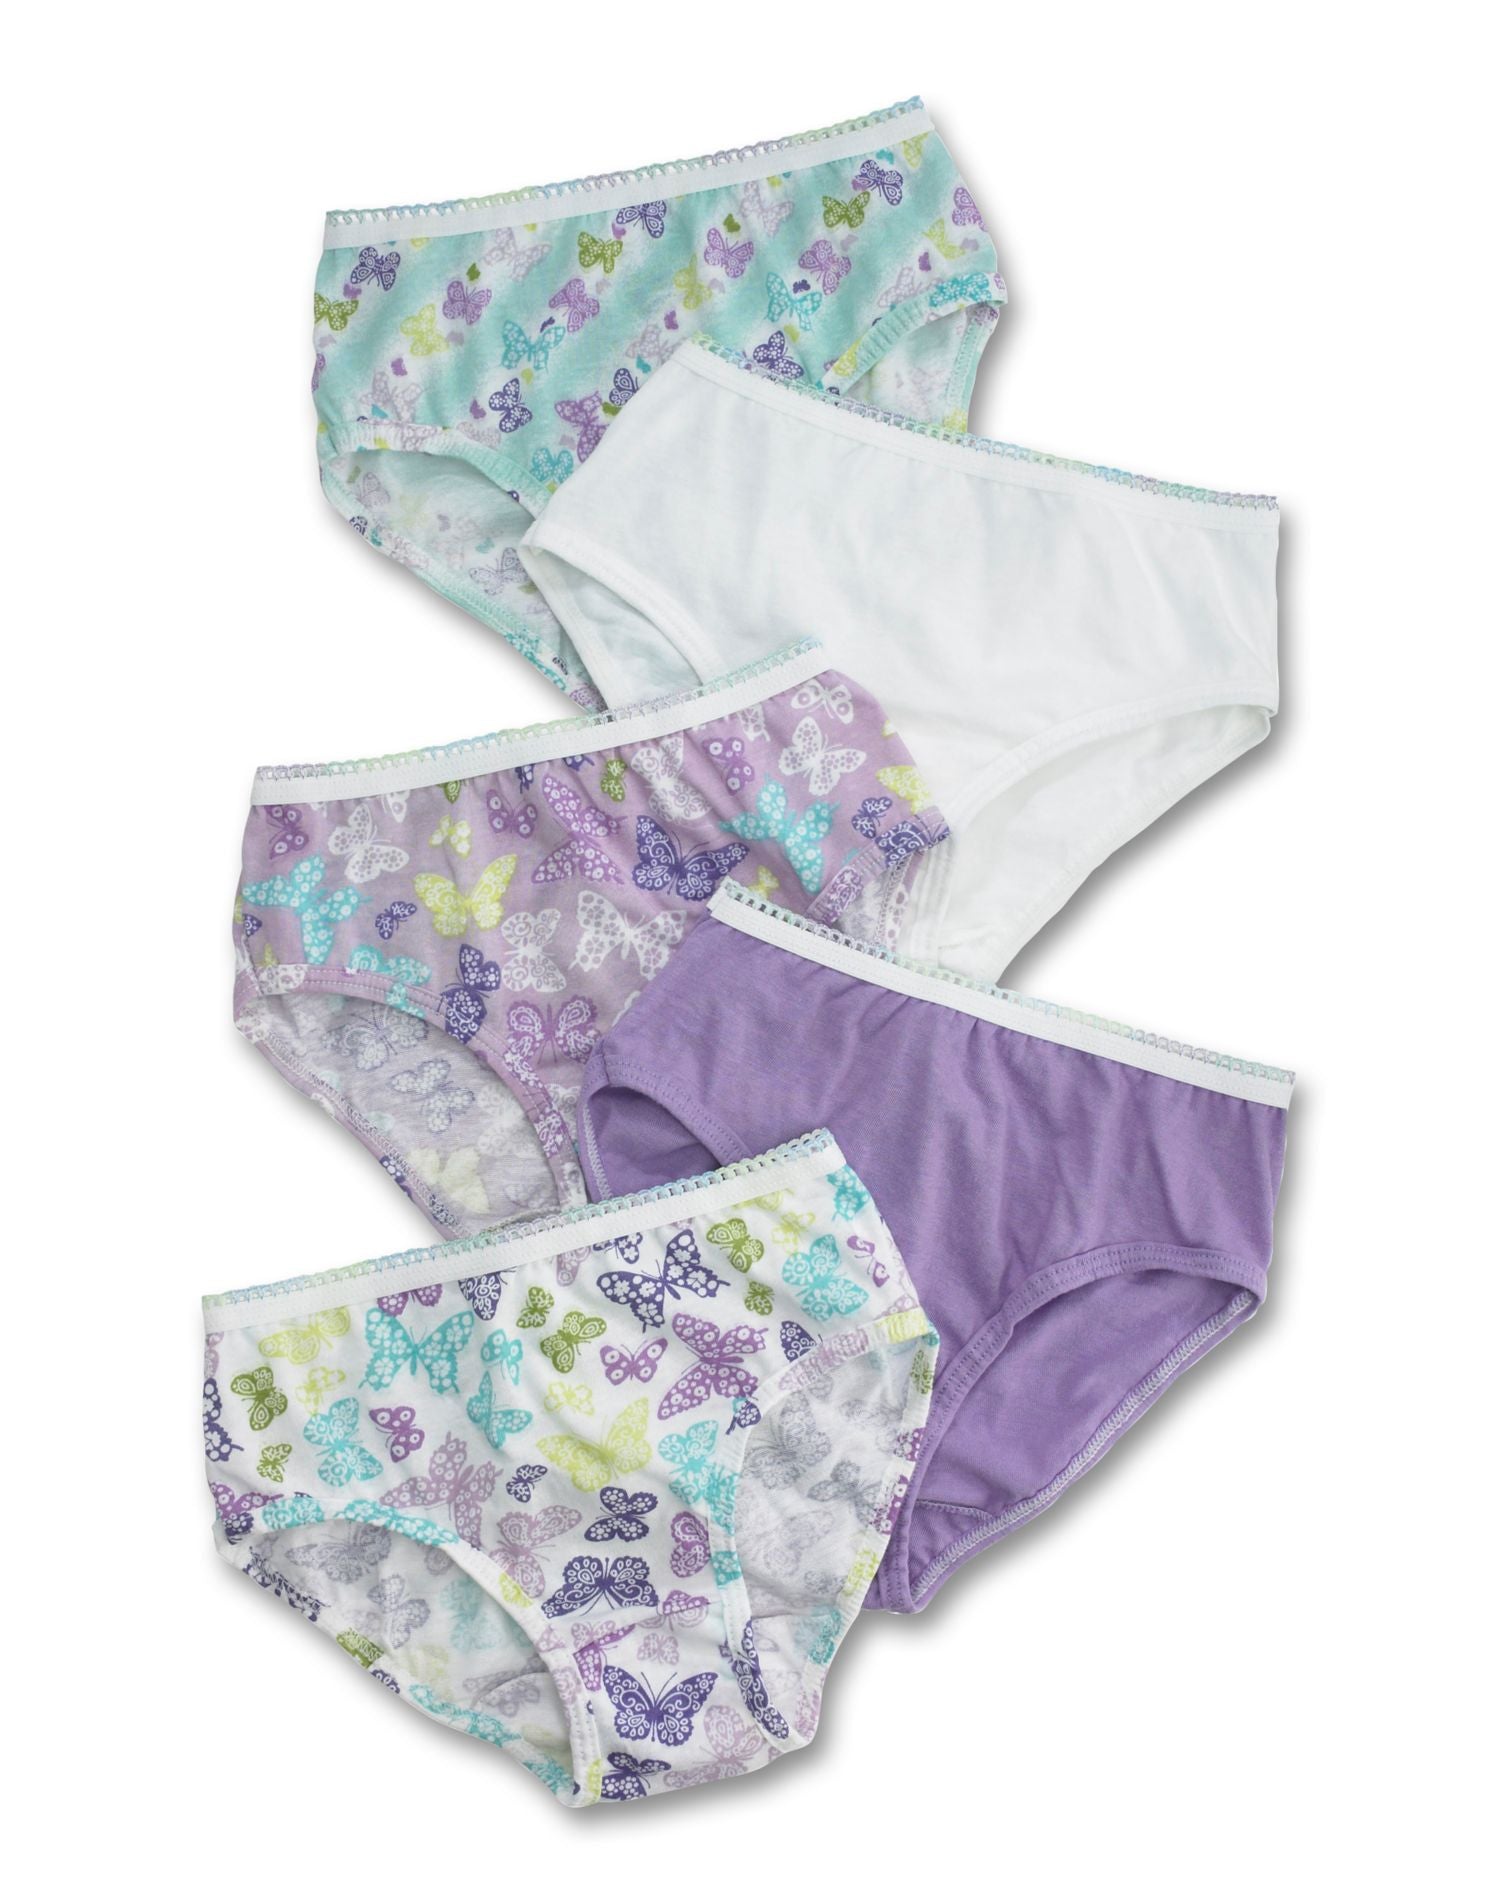 Hanes Girls' No Ride Up Cotton Low Rise Briefs, Size 16, 9-Pack